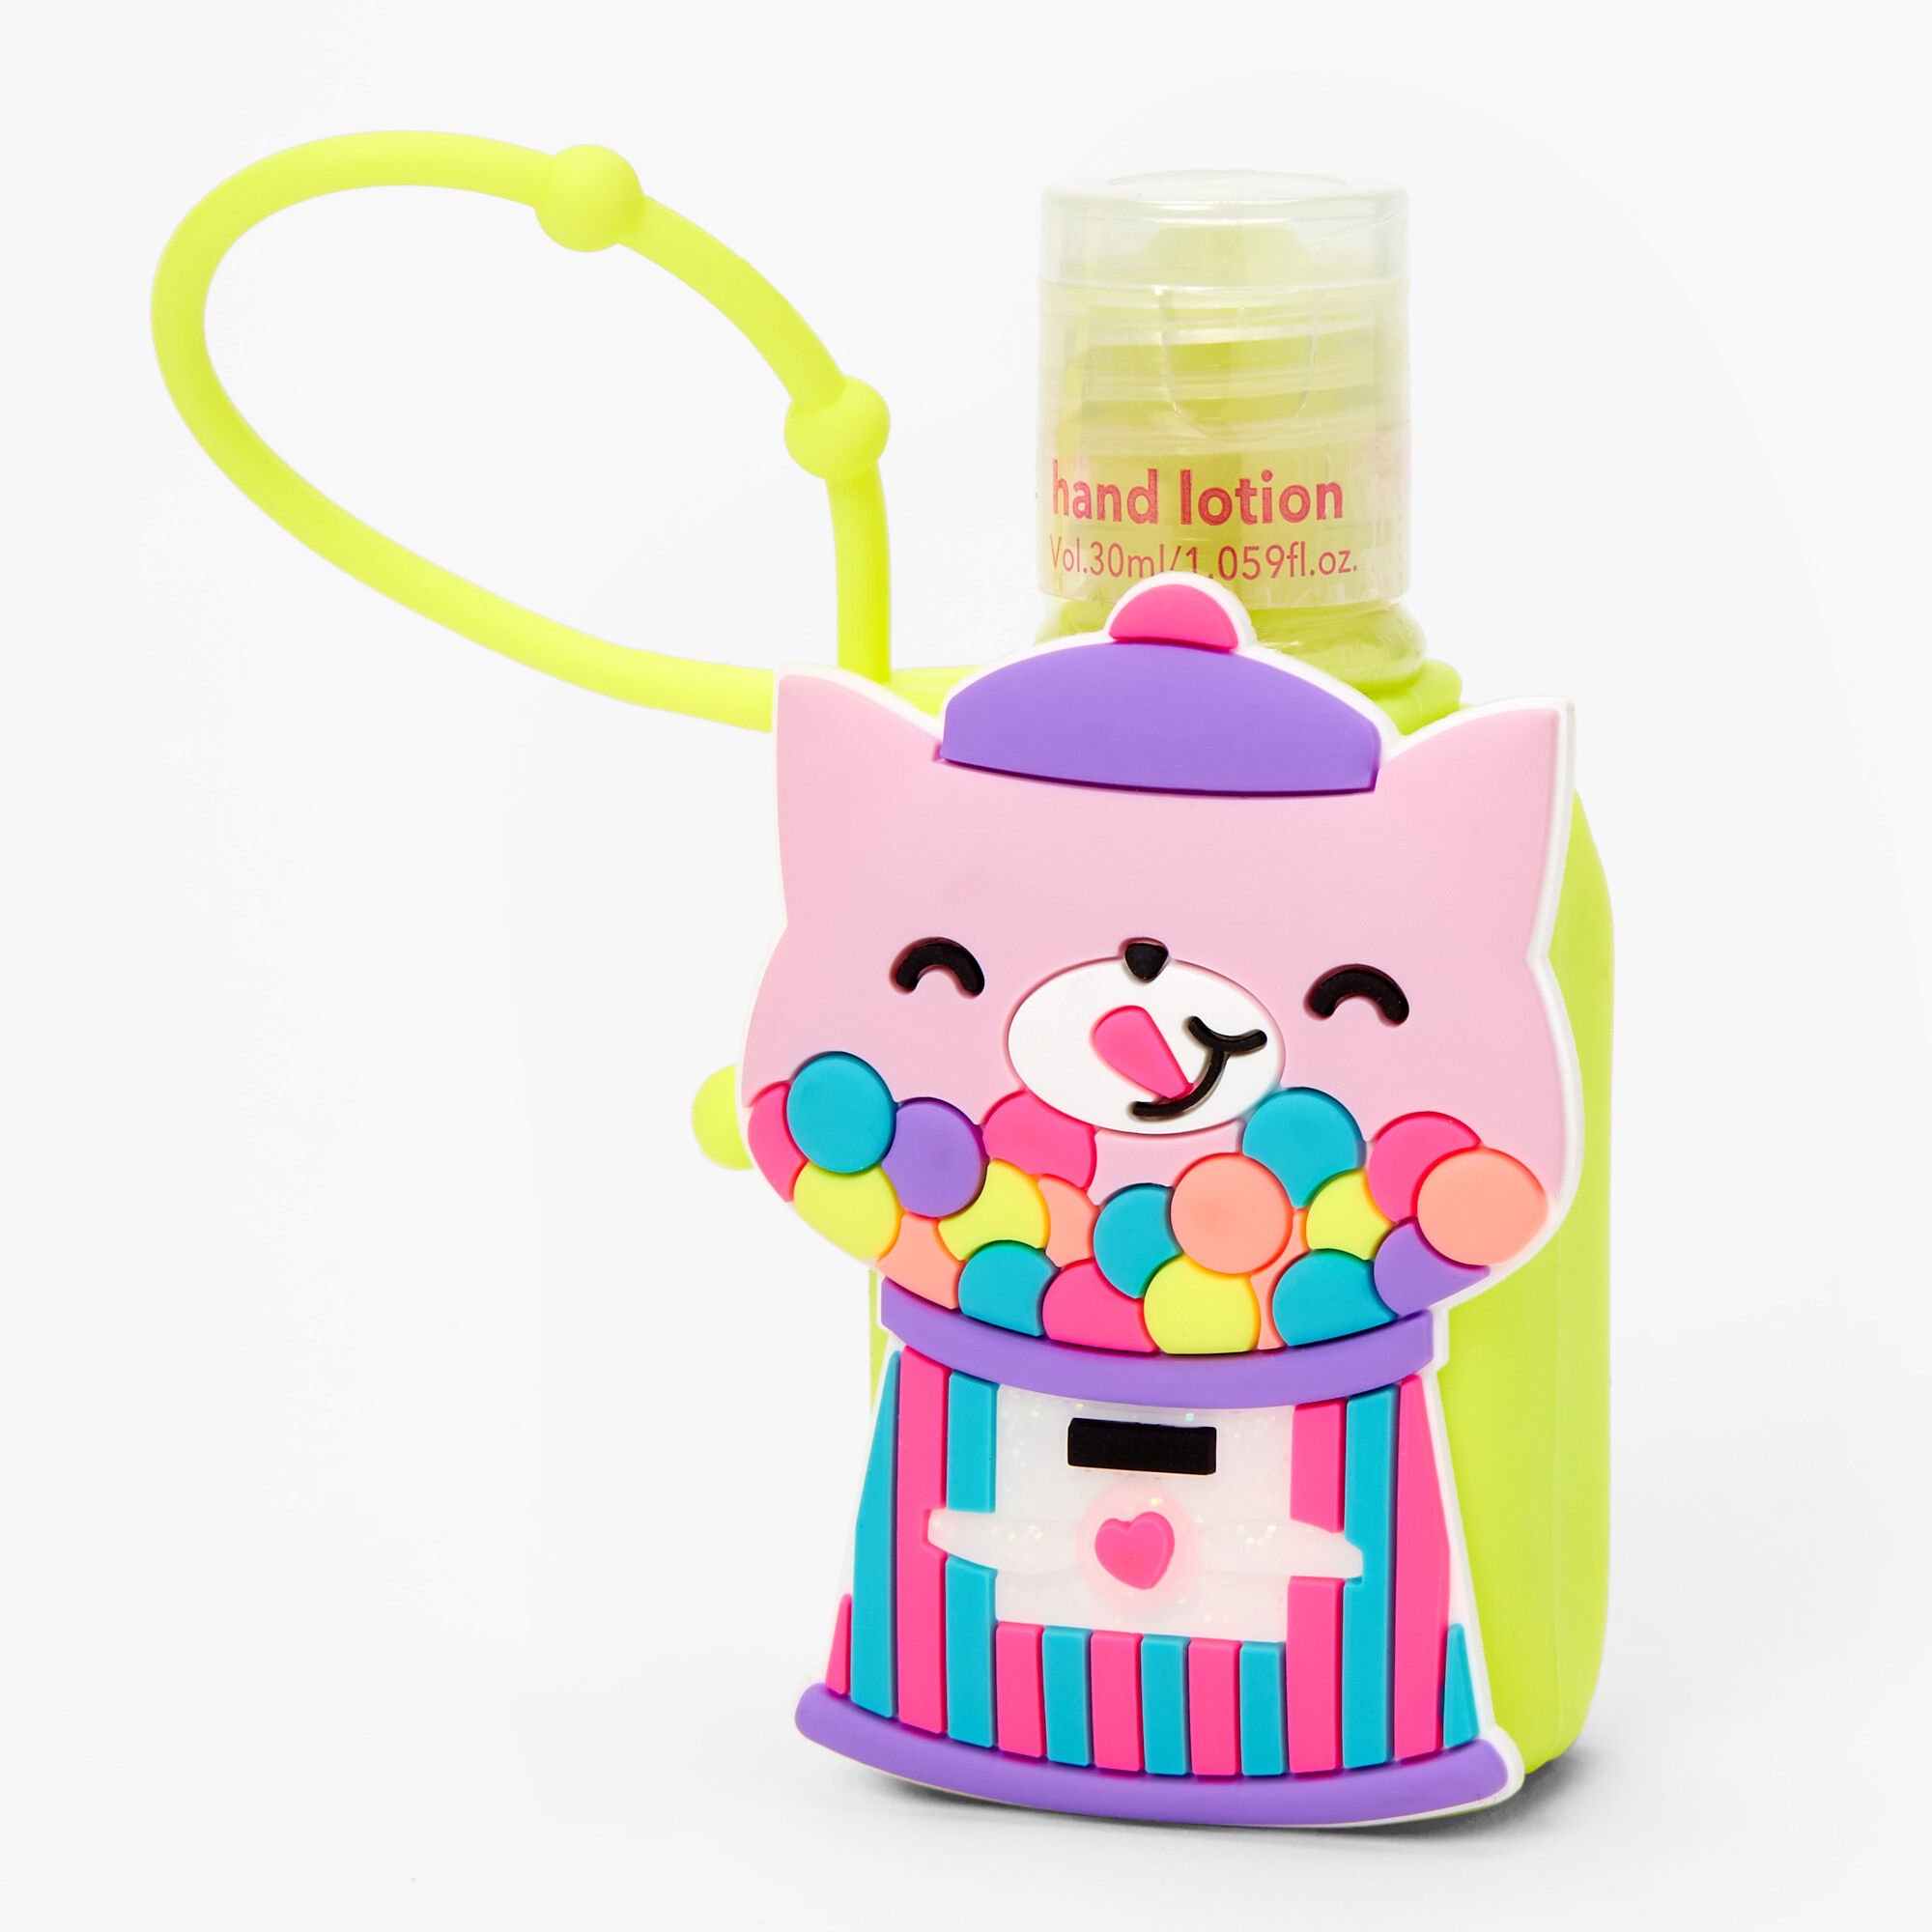 View Claires Cat Gumball Machine Hand Lotion Vanilla information